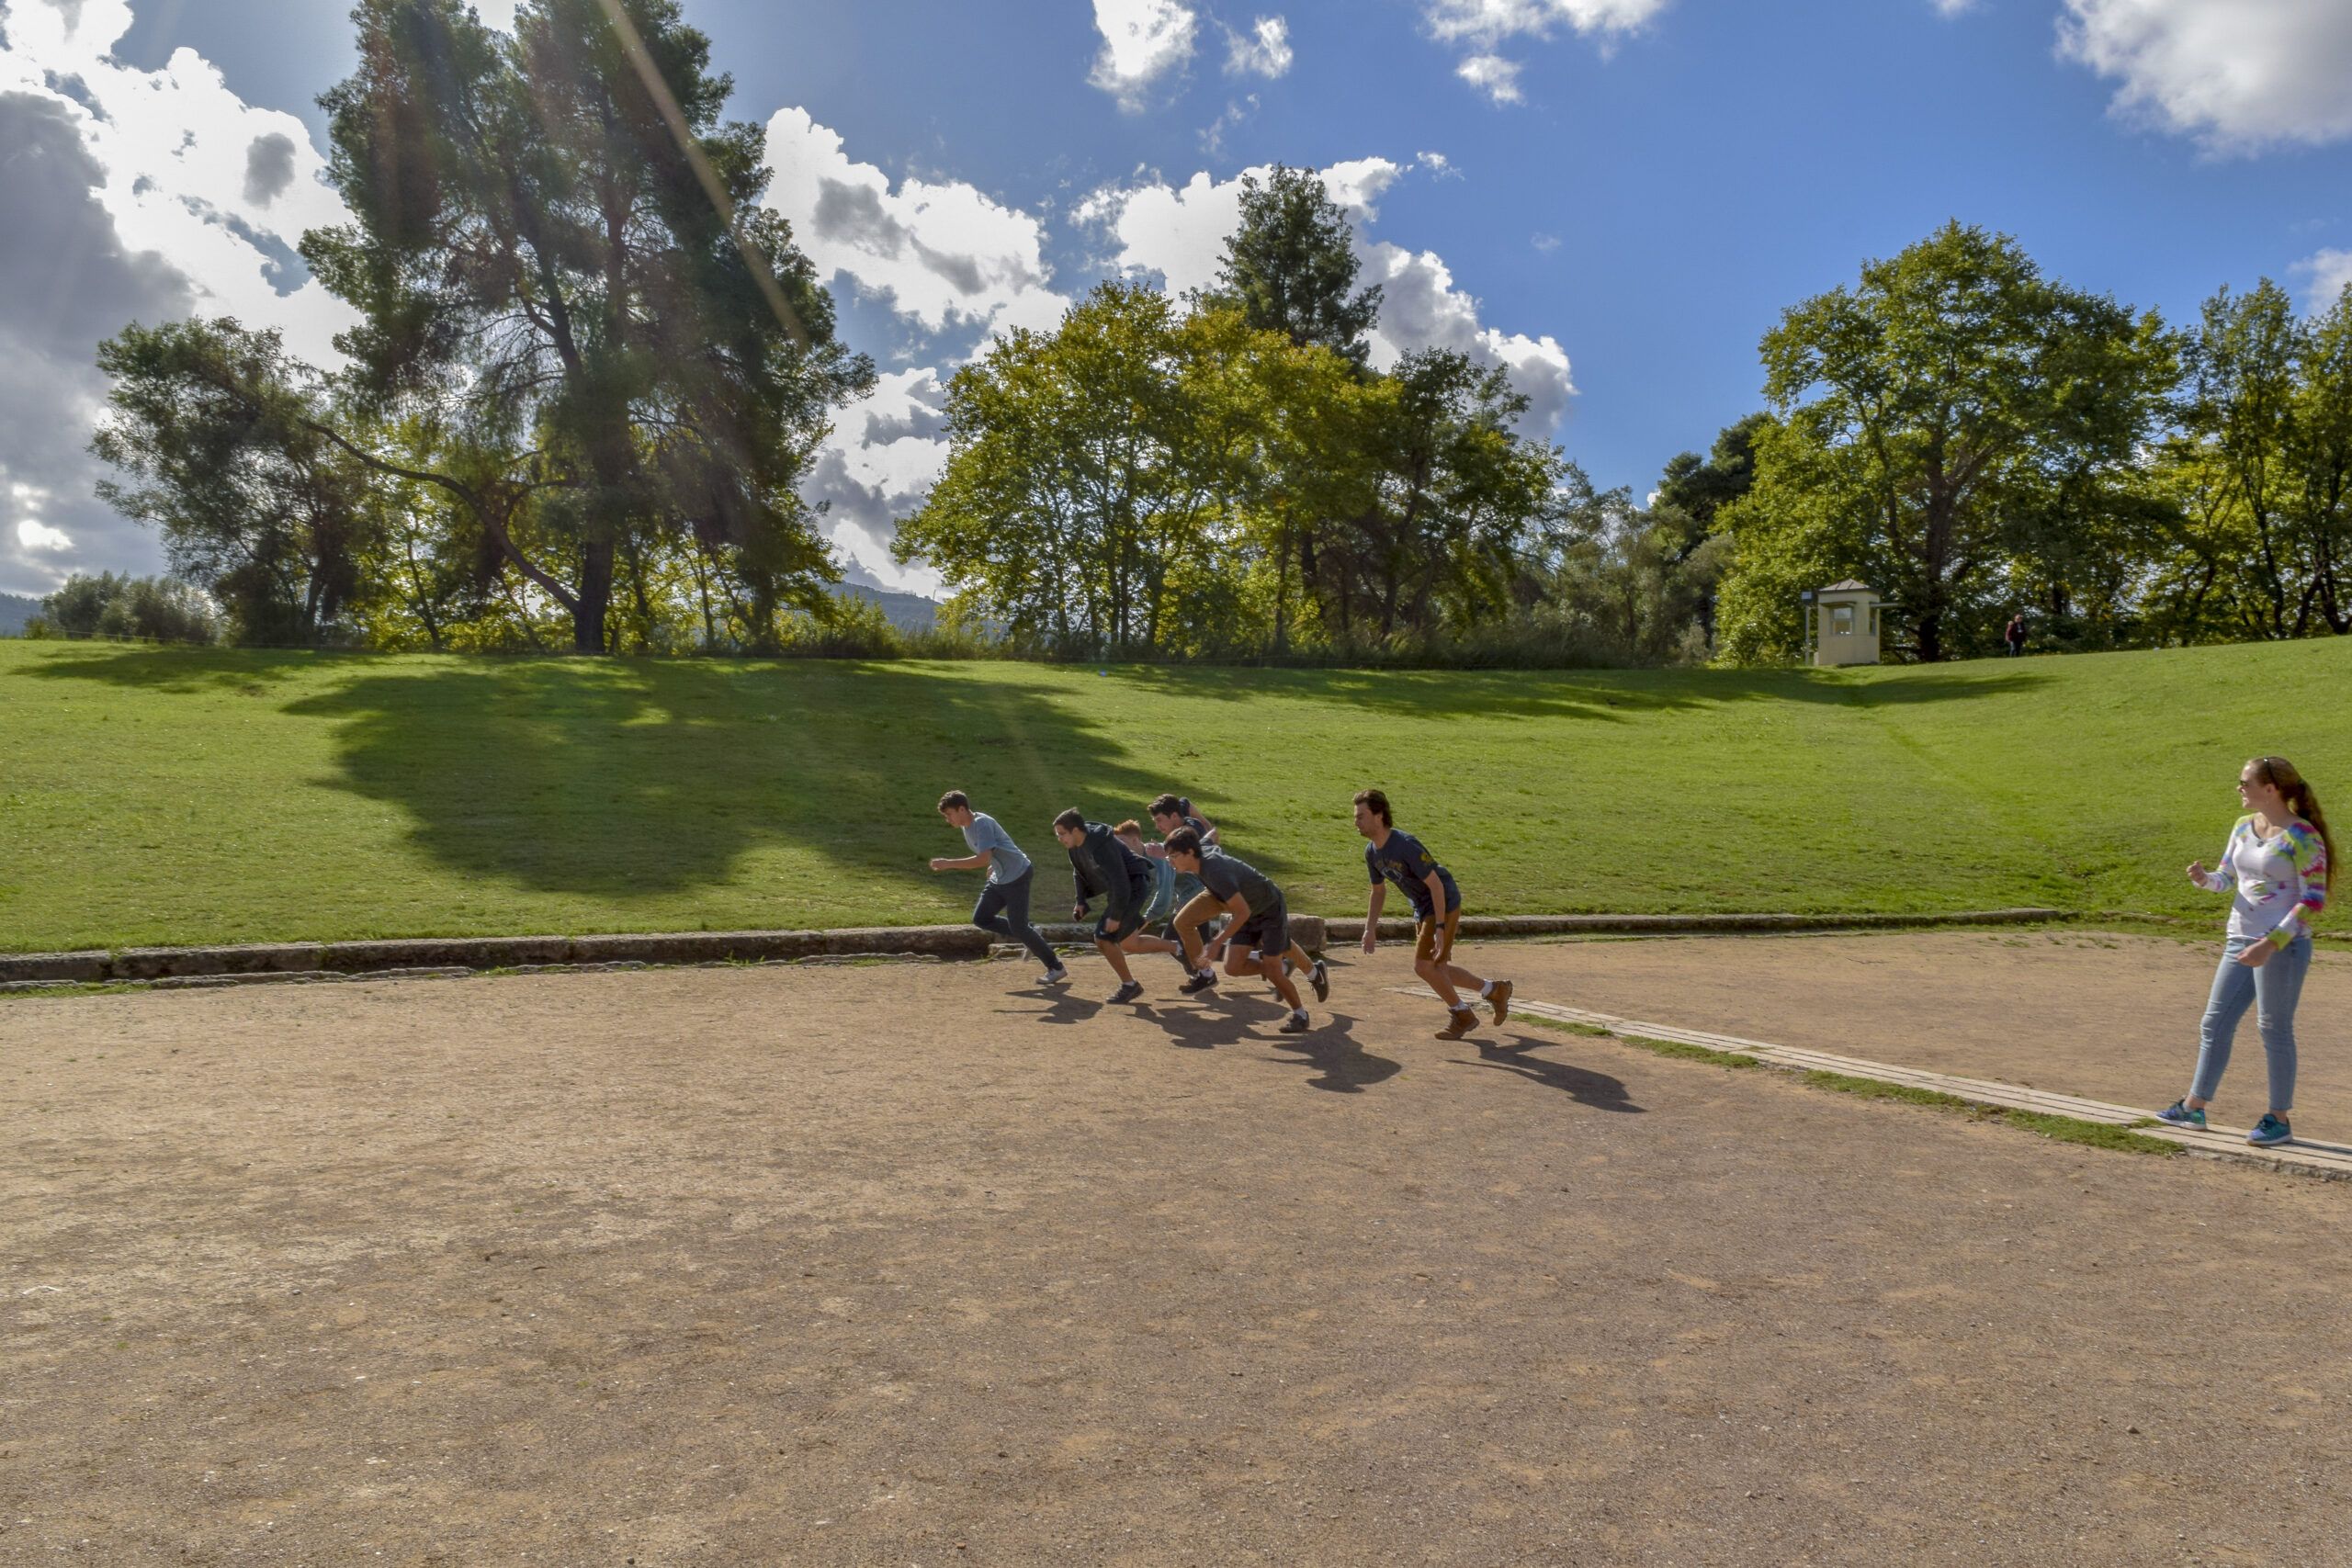 CYA - College Year in Athens 3. CYA Students Running on the stadium of ancient Olympia scaled